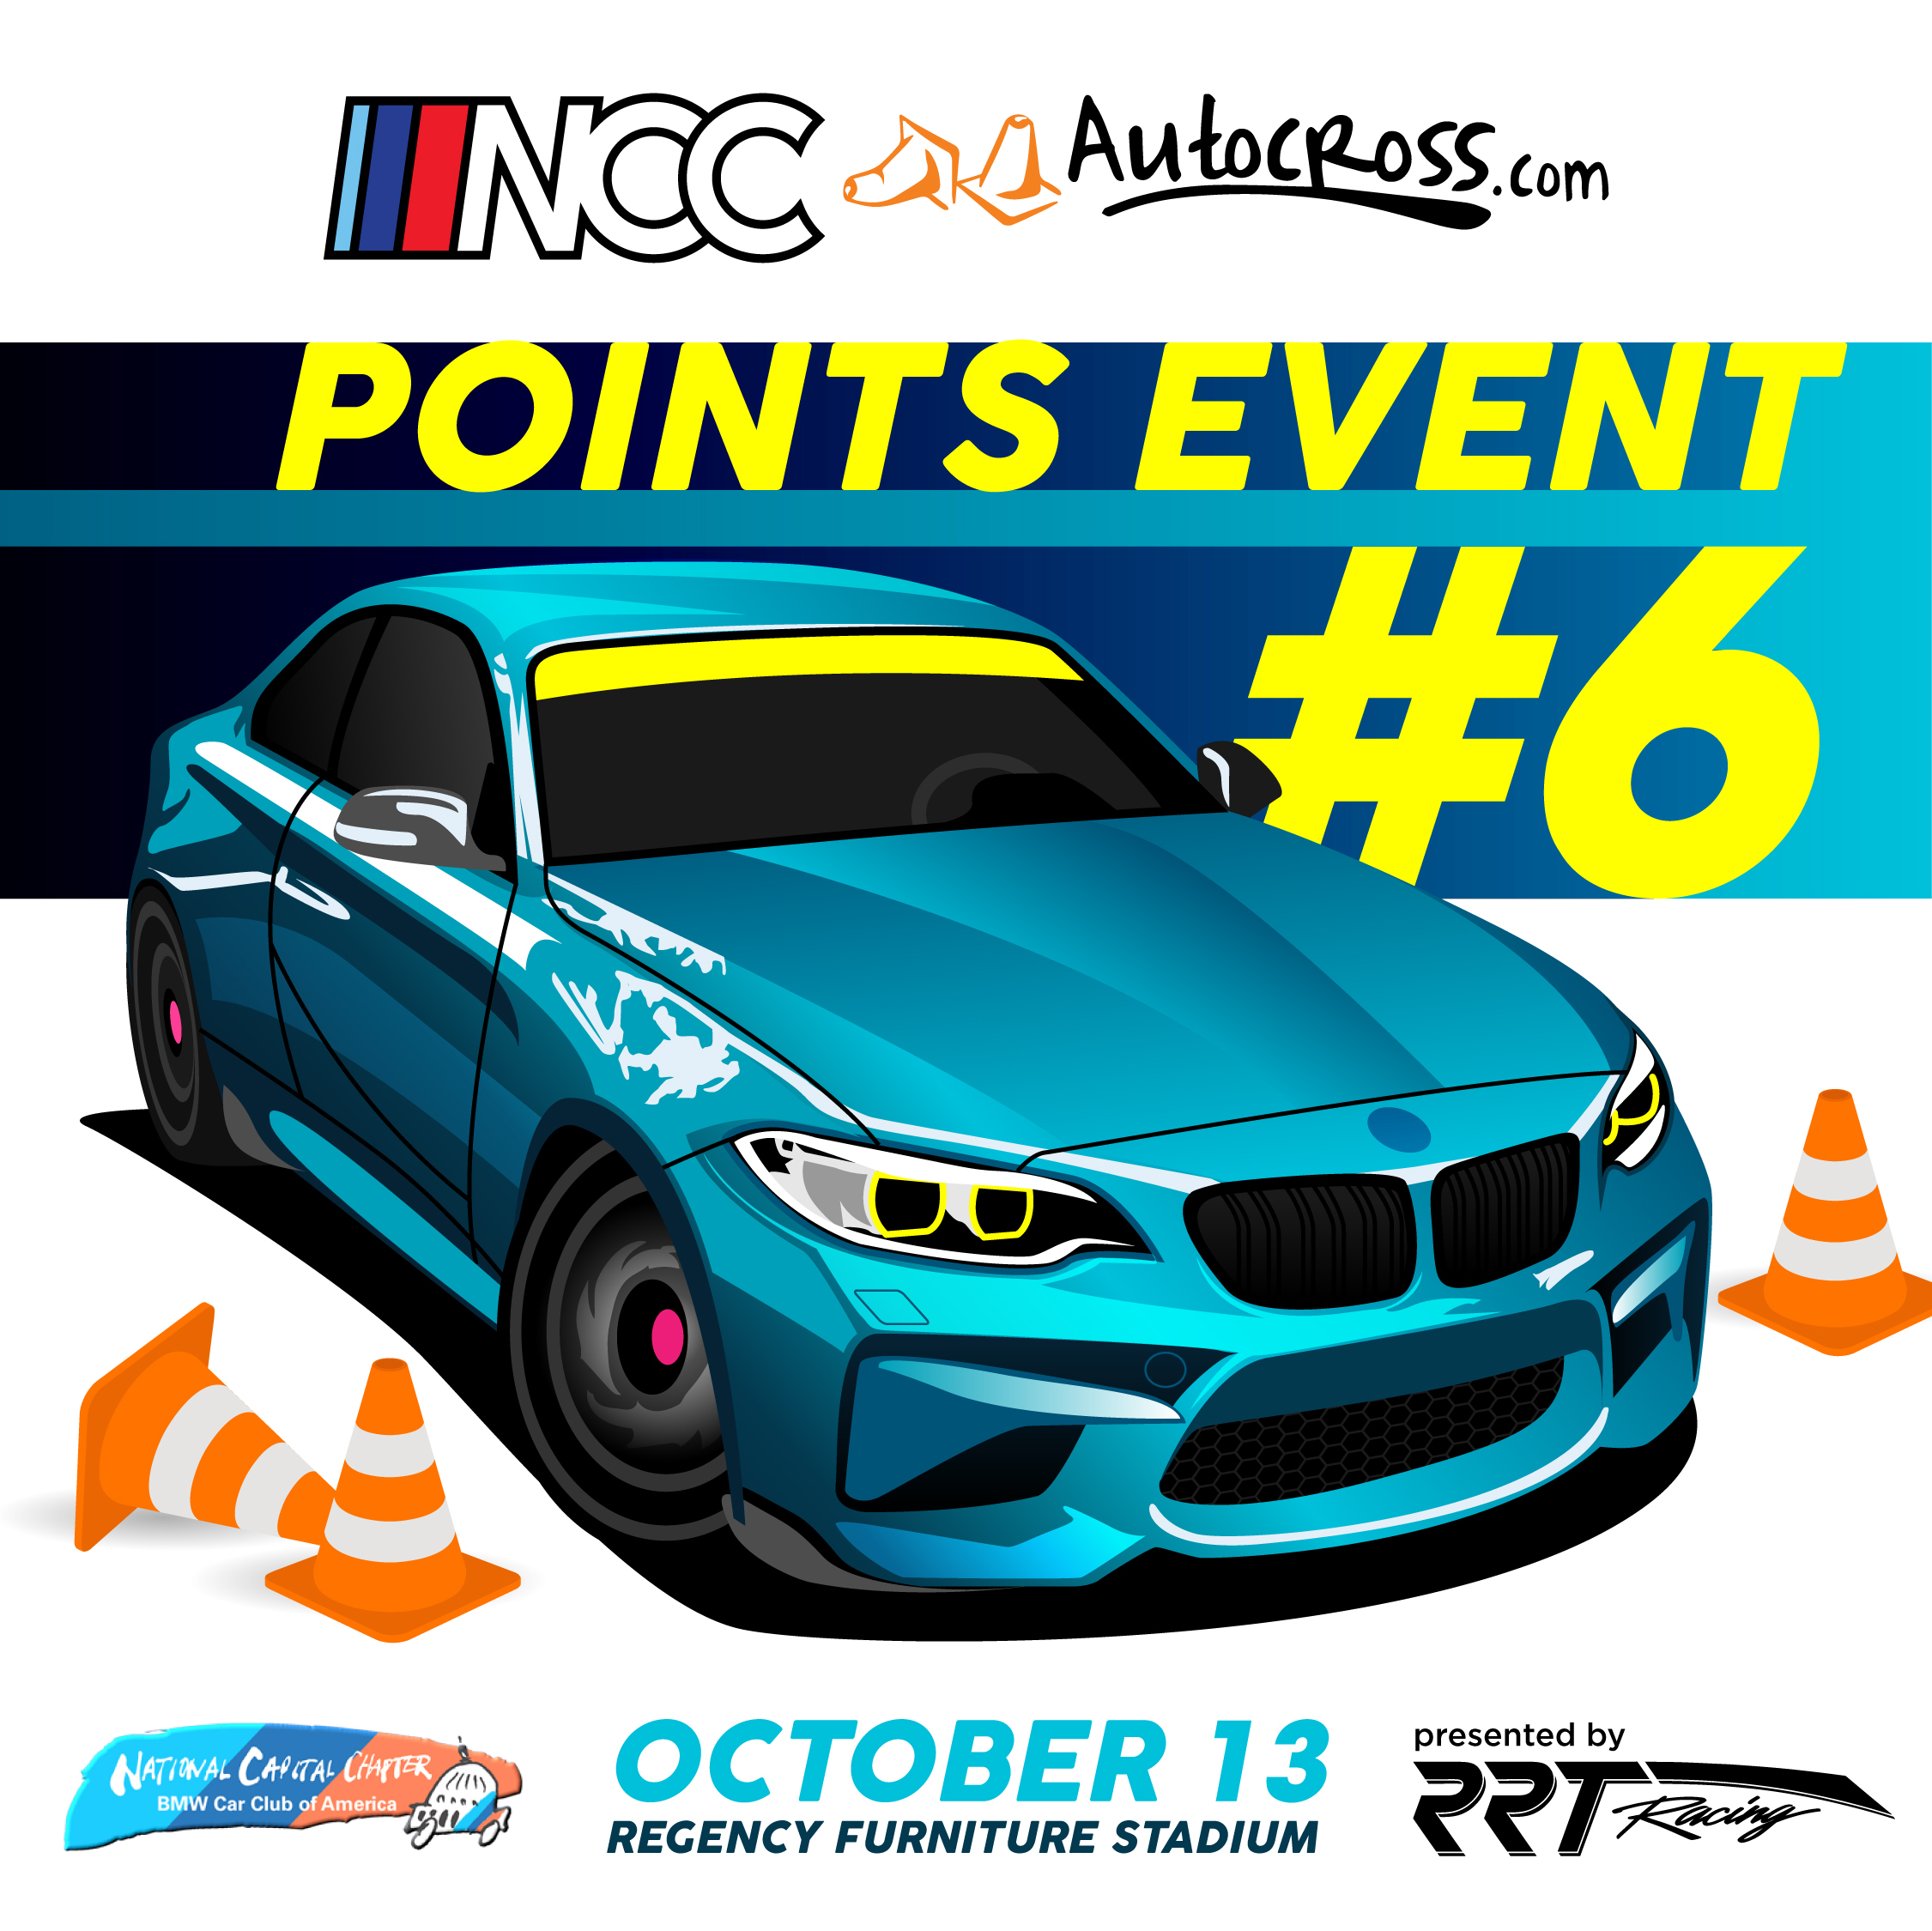 Thanks for coming to Points Event #6!